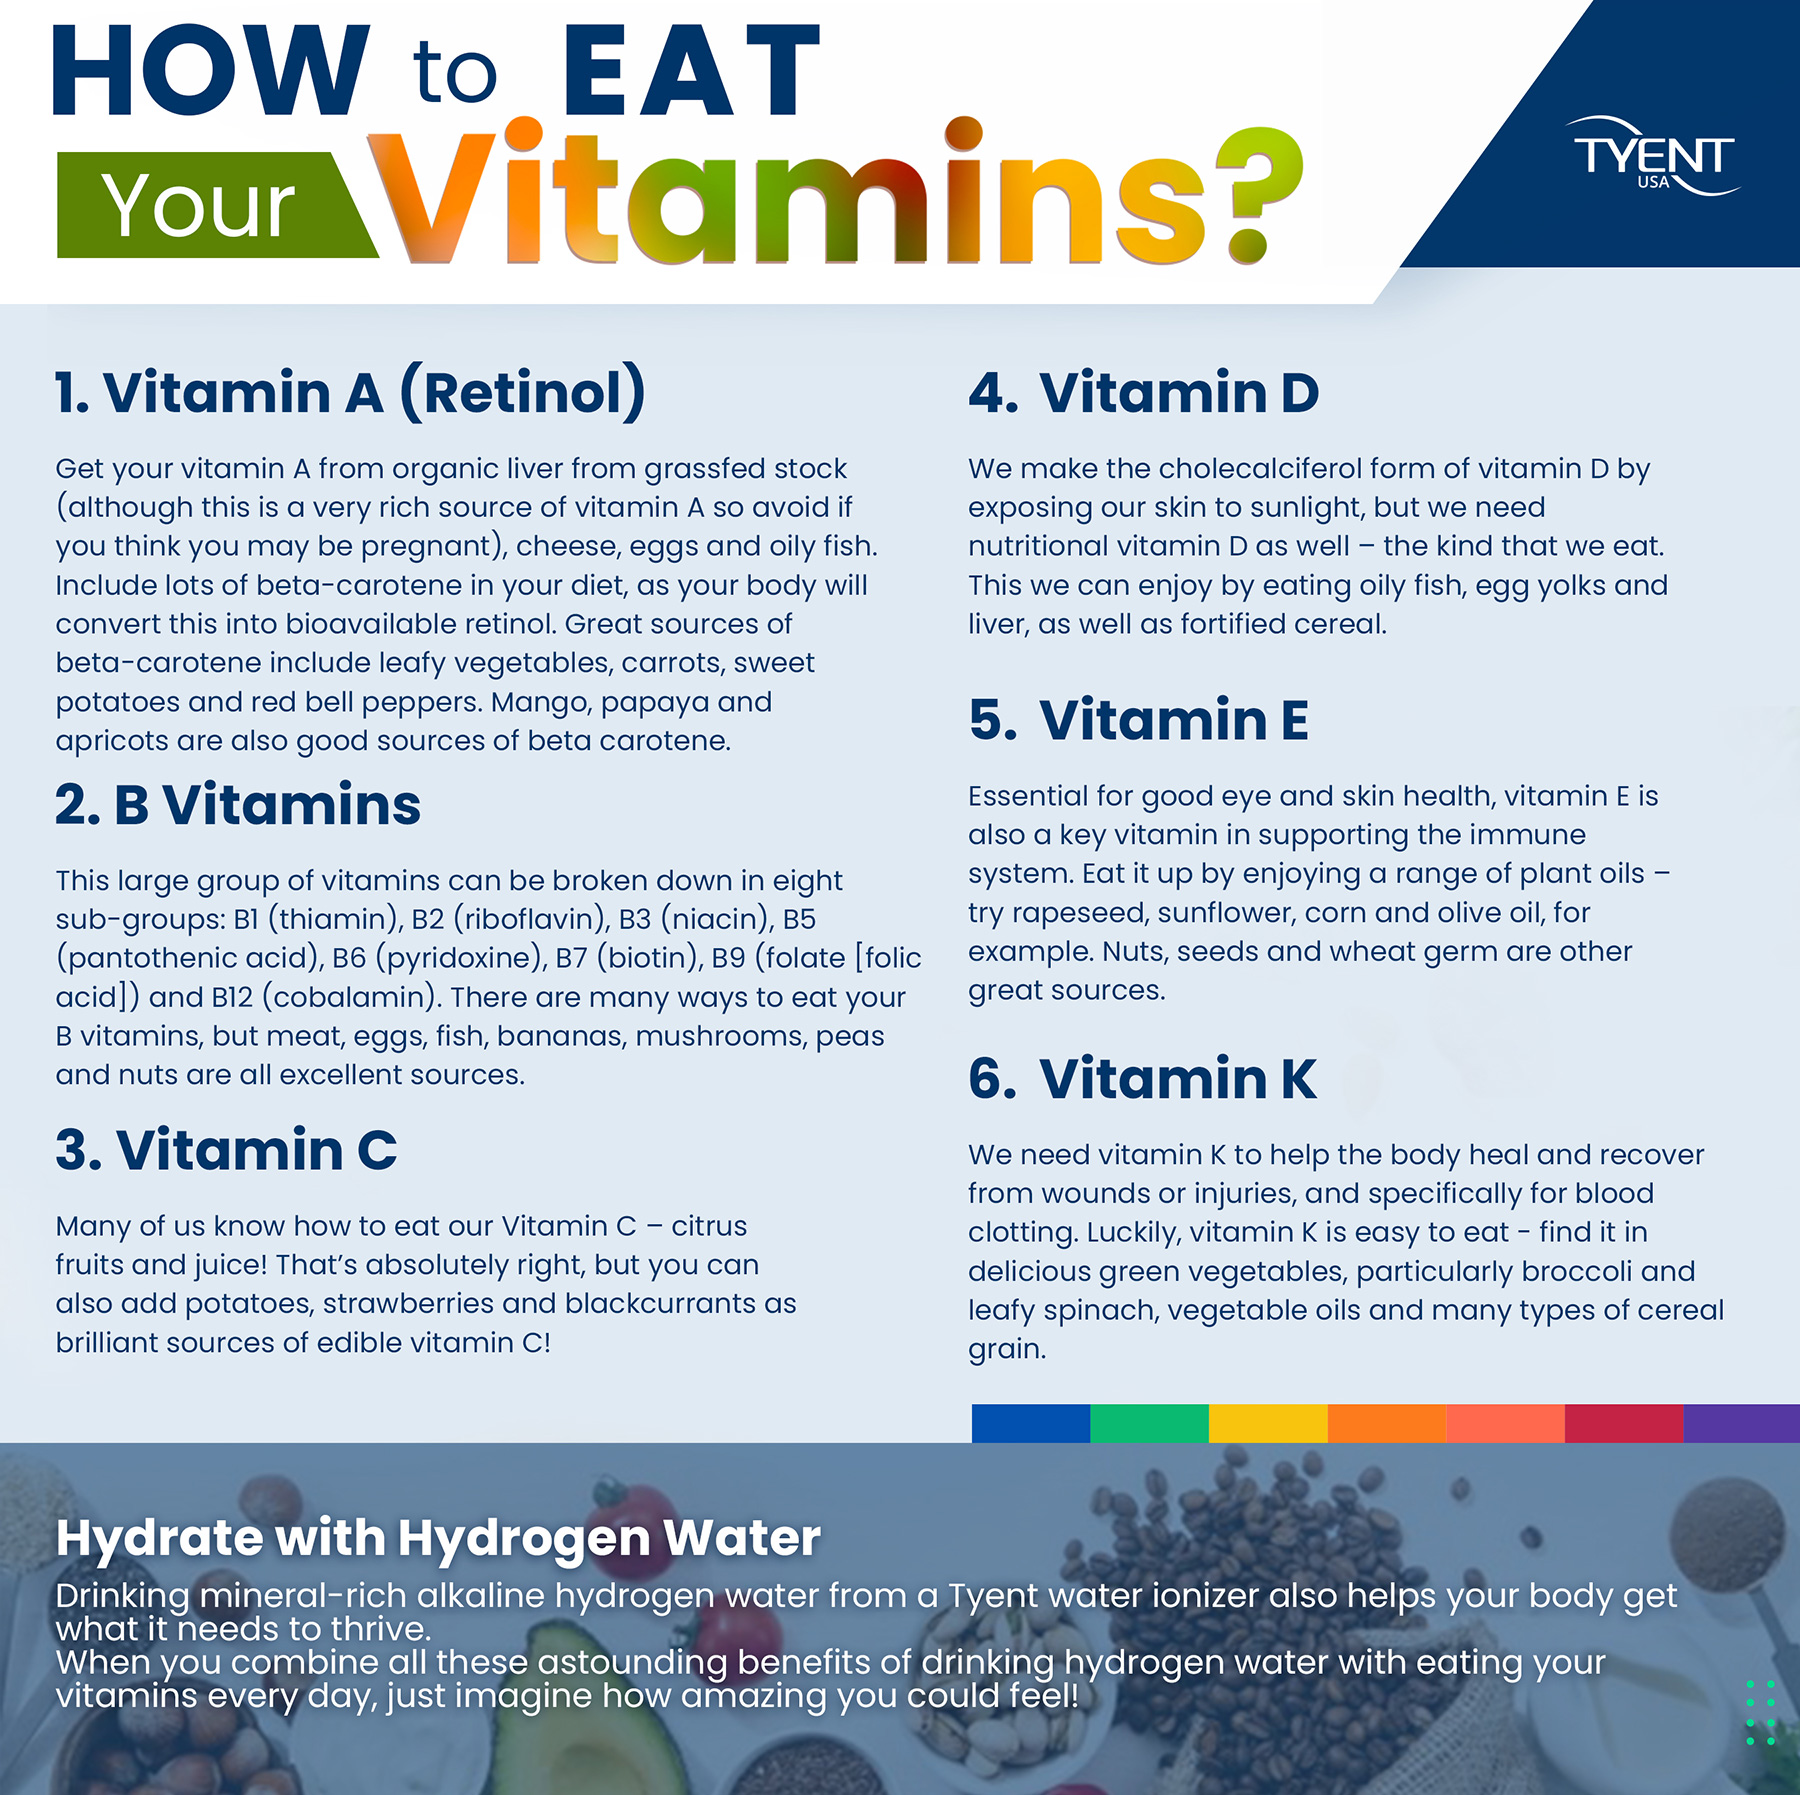 How to Eat Your Vitamins (info)